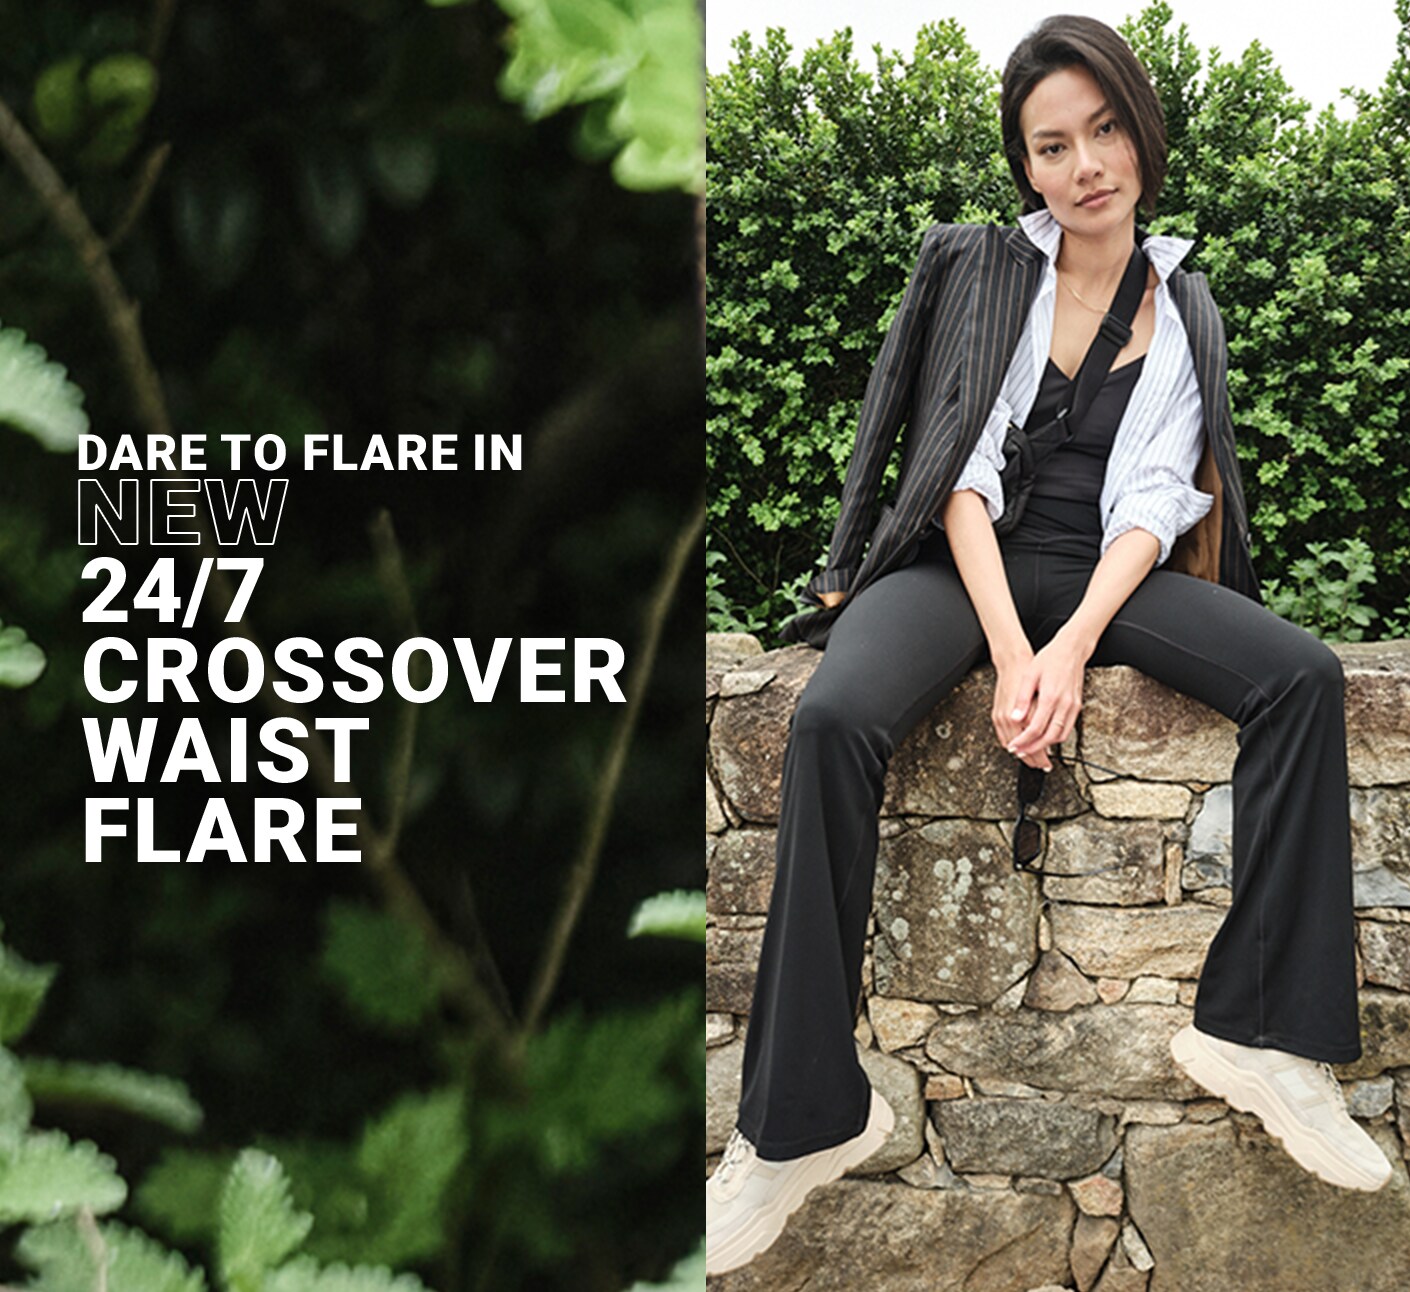 Dare to Flare in New 24/7 Crossover Waist Flare.